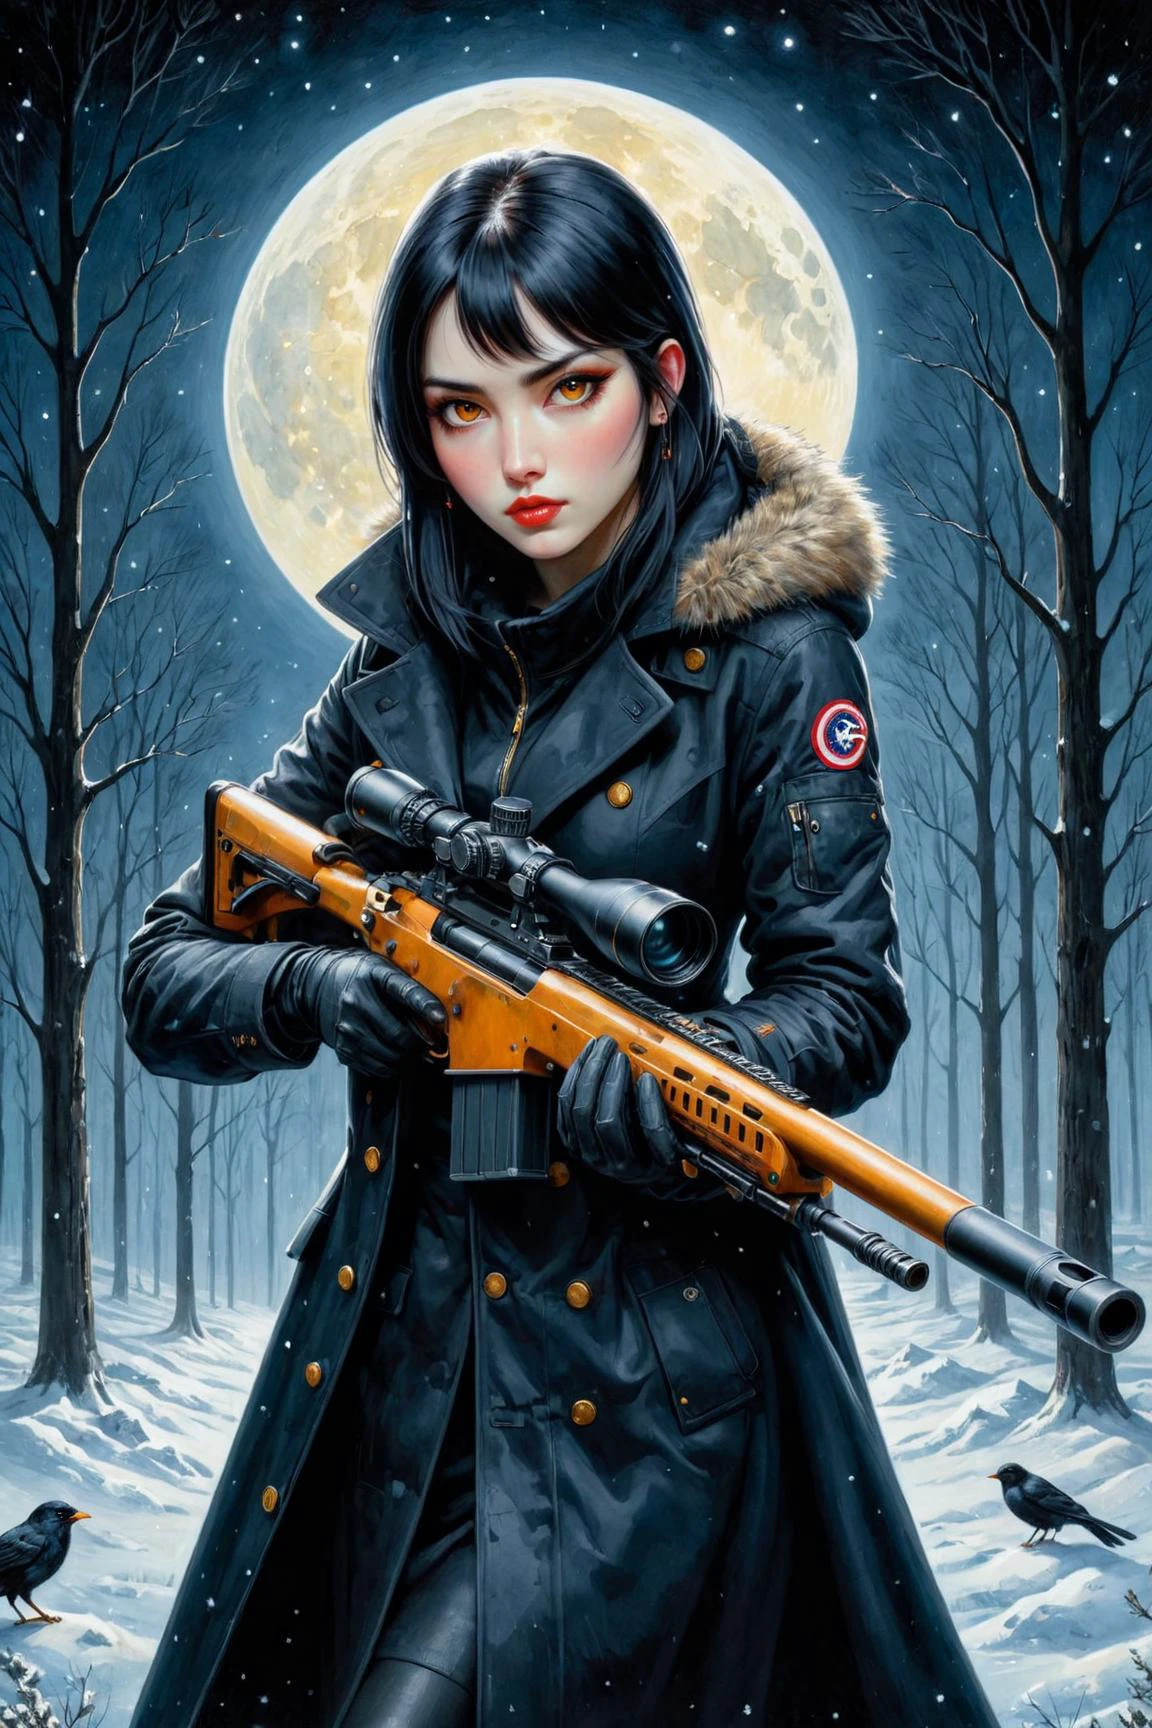 by Harumi Hironaka and Bill Jacklin in the style of Catherine Hyde, using a sniper rifle 